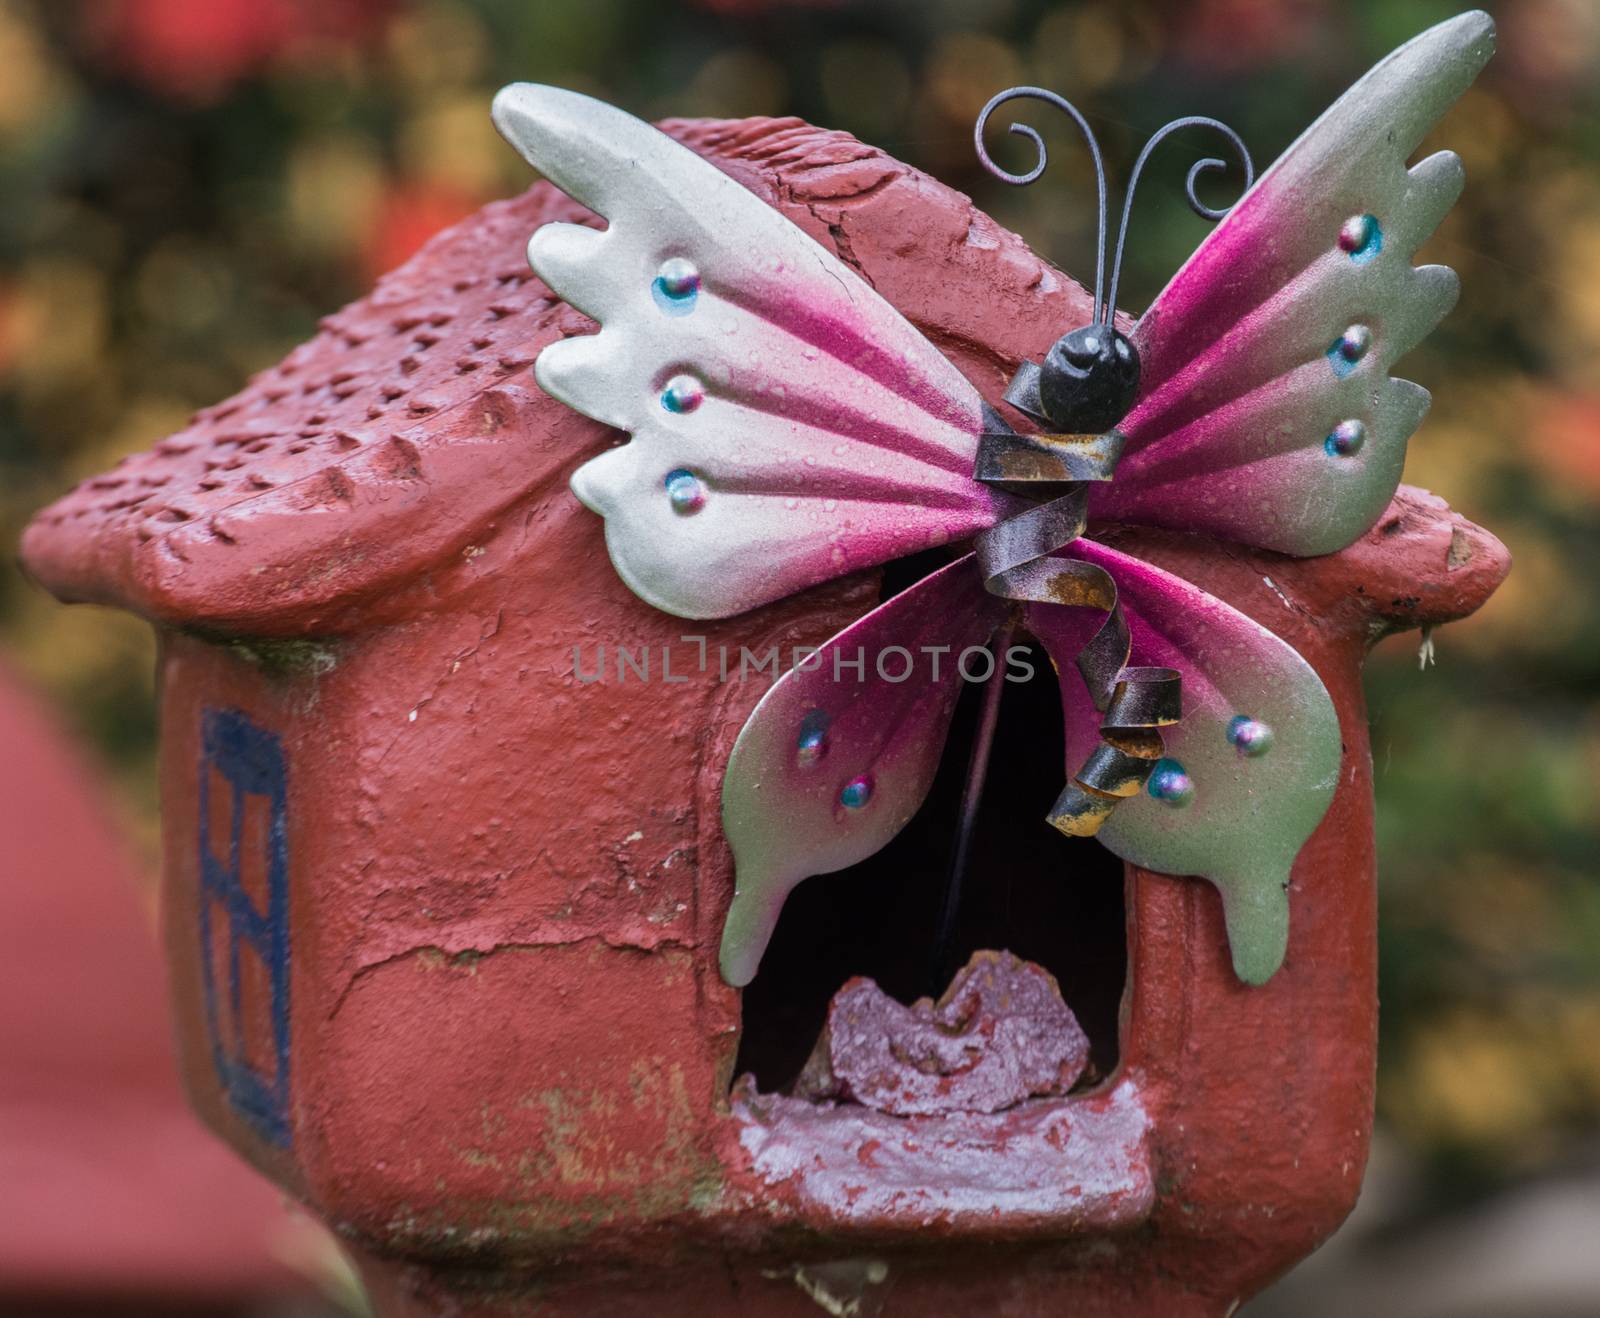 Decorative Outdoor Metal Butterfly Outside A Fake House by Kinetoscope